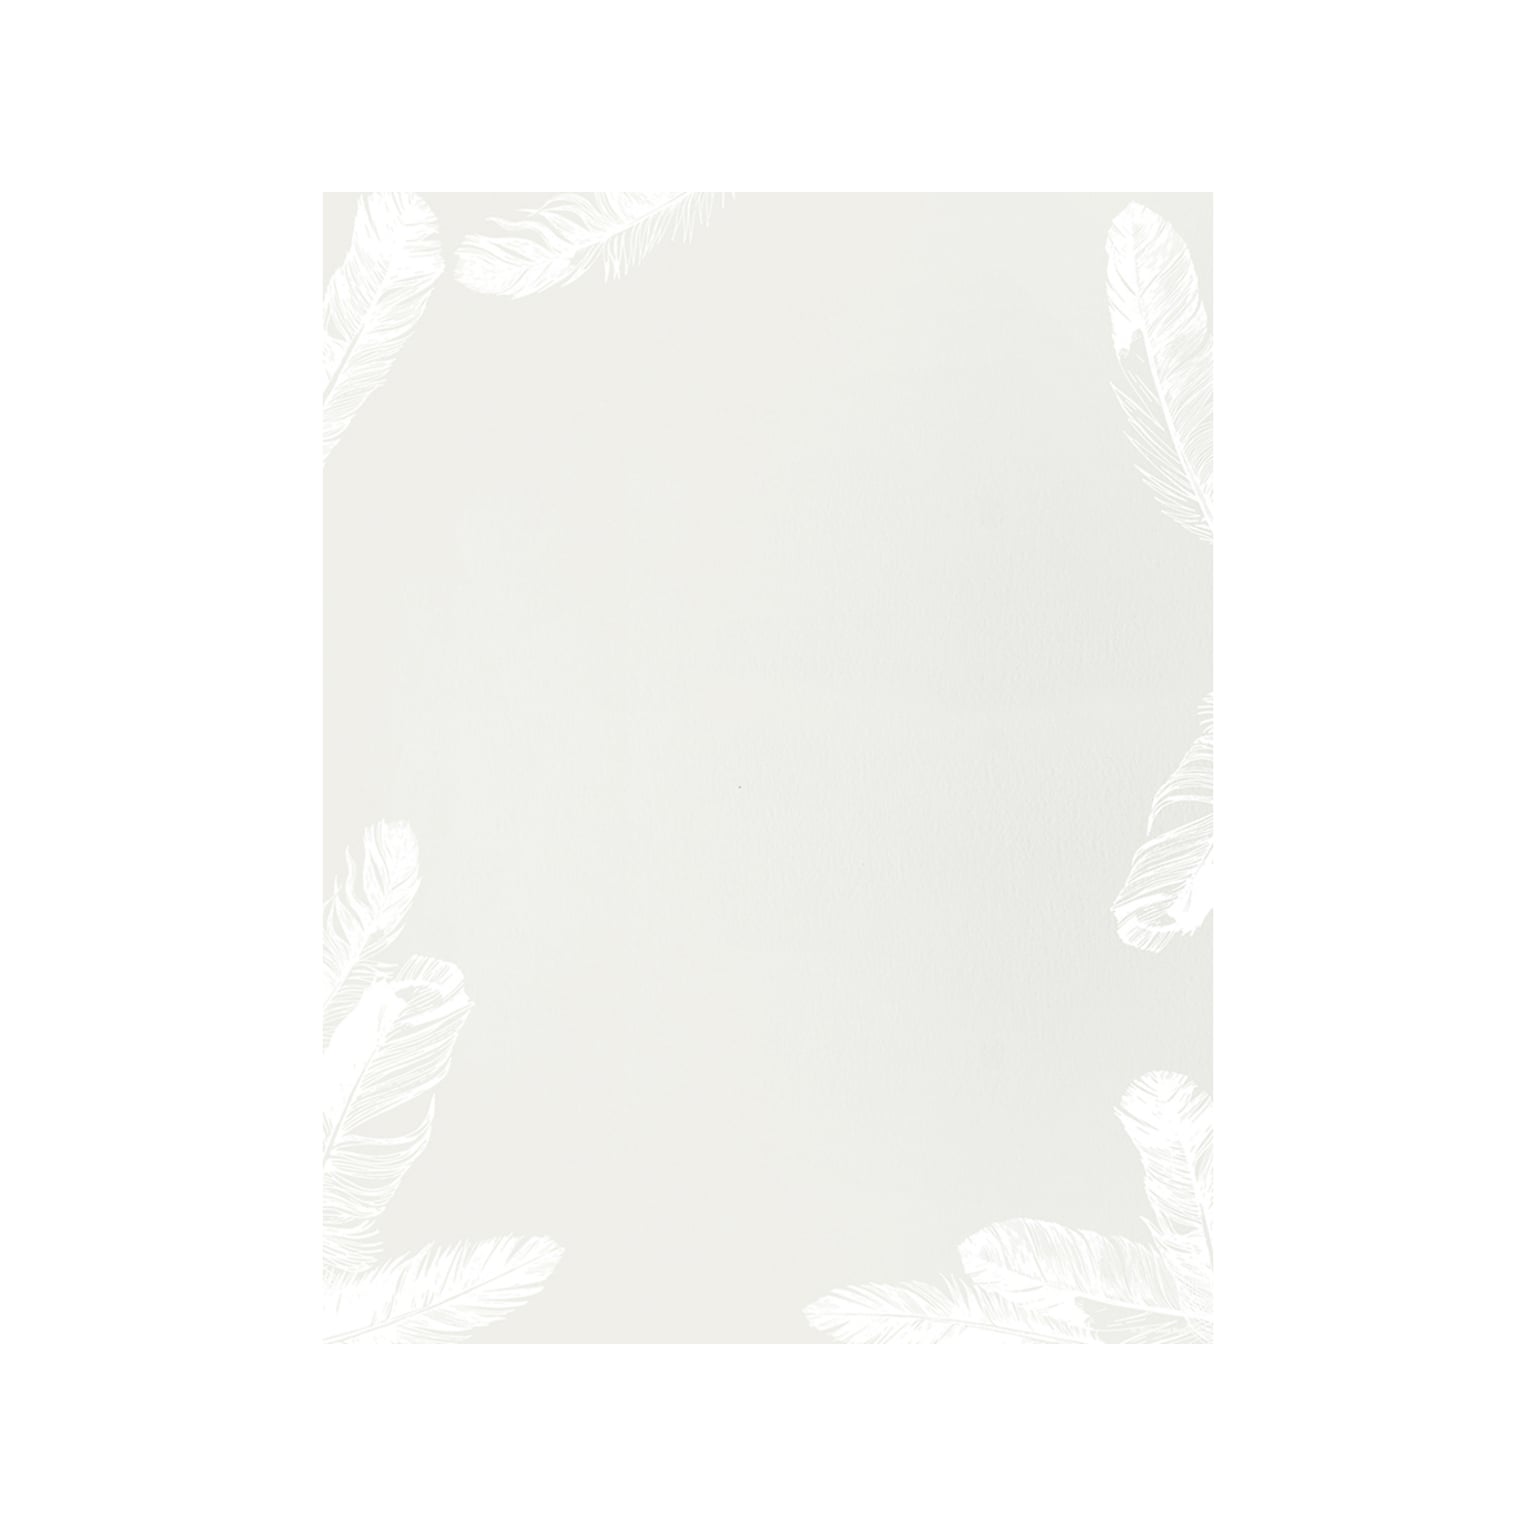 Great Papers! Soft Feathers Everyday Letterhead, Gray/White, 80/Pack (2019066)